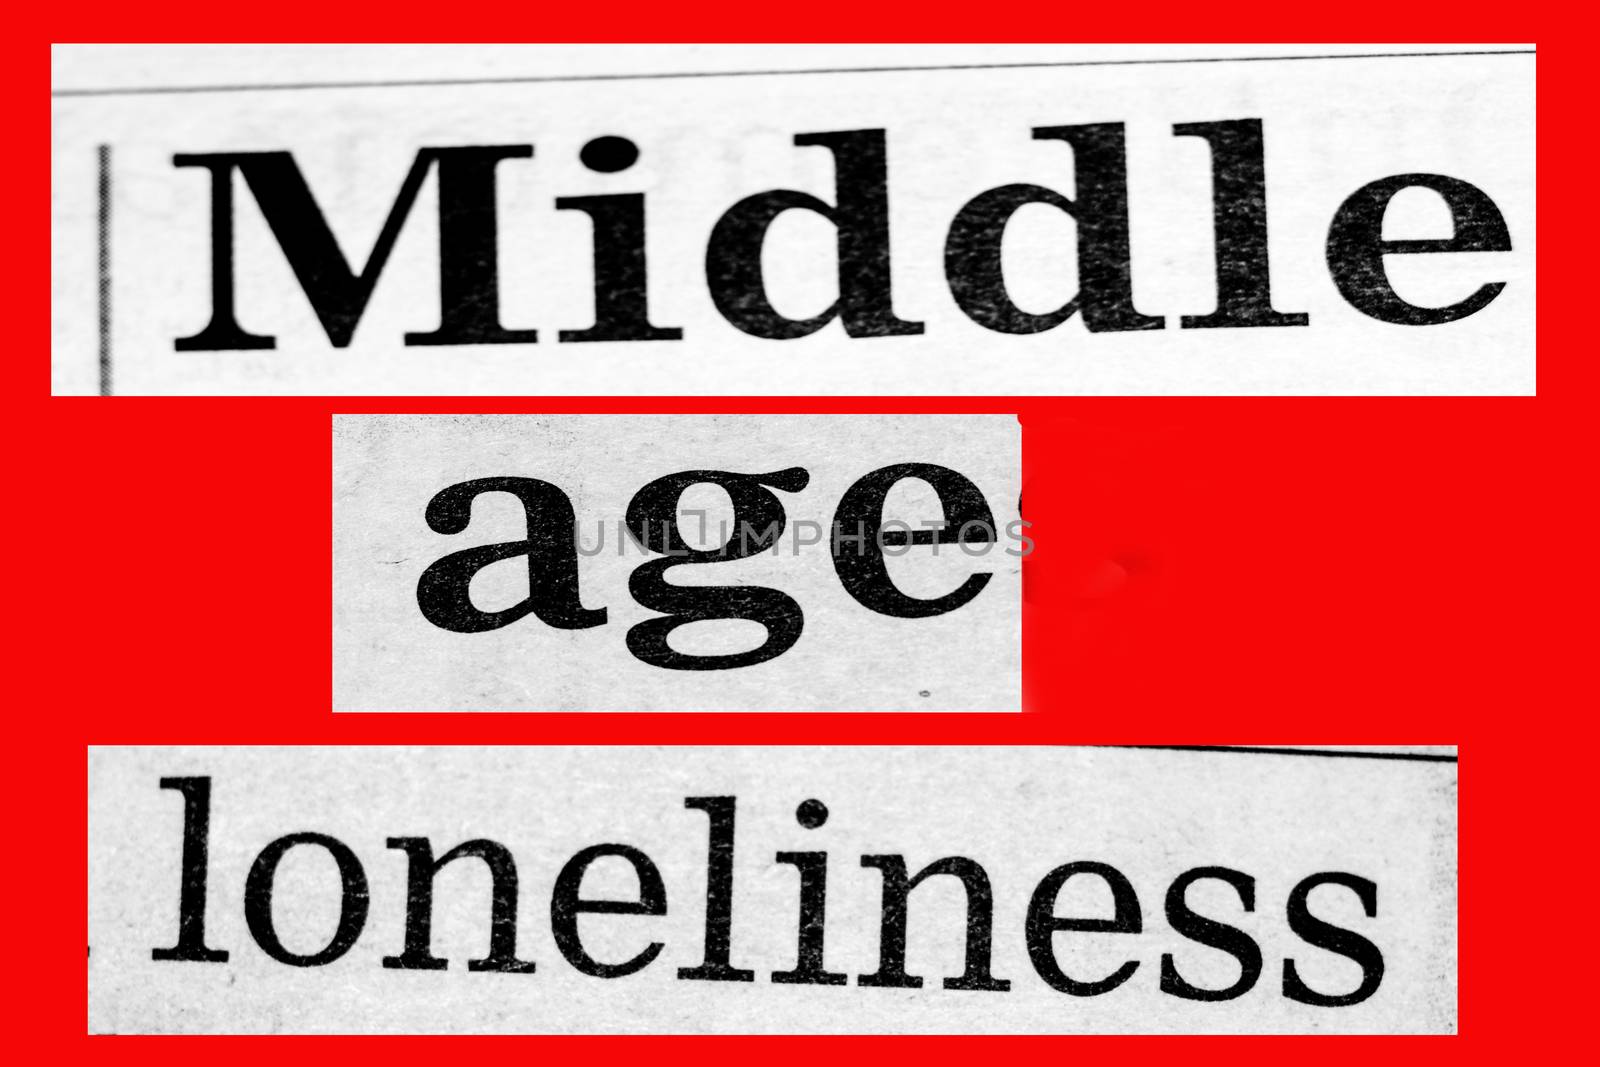 Distressed newspaper headline about middle age loneliness by paddythegolfer